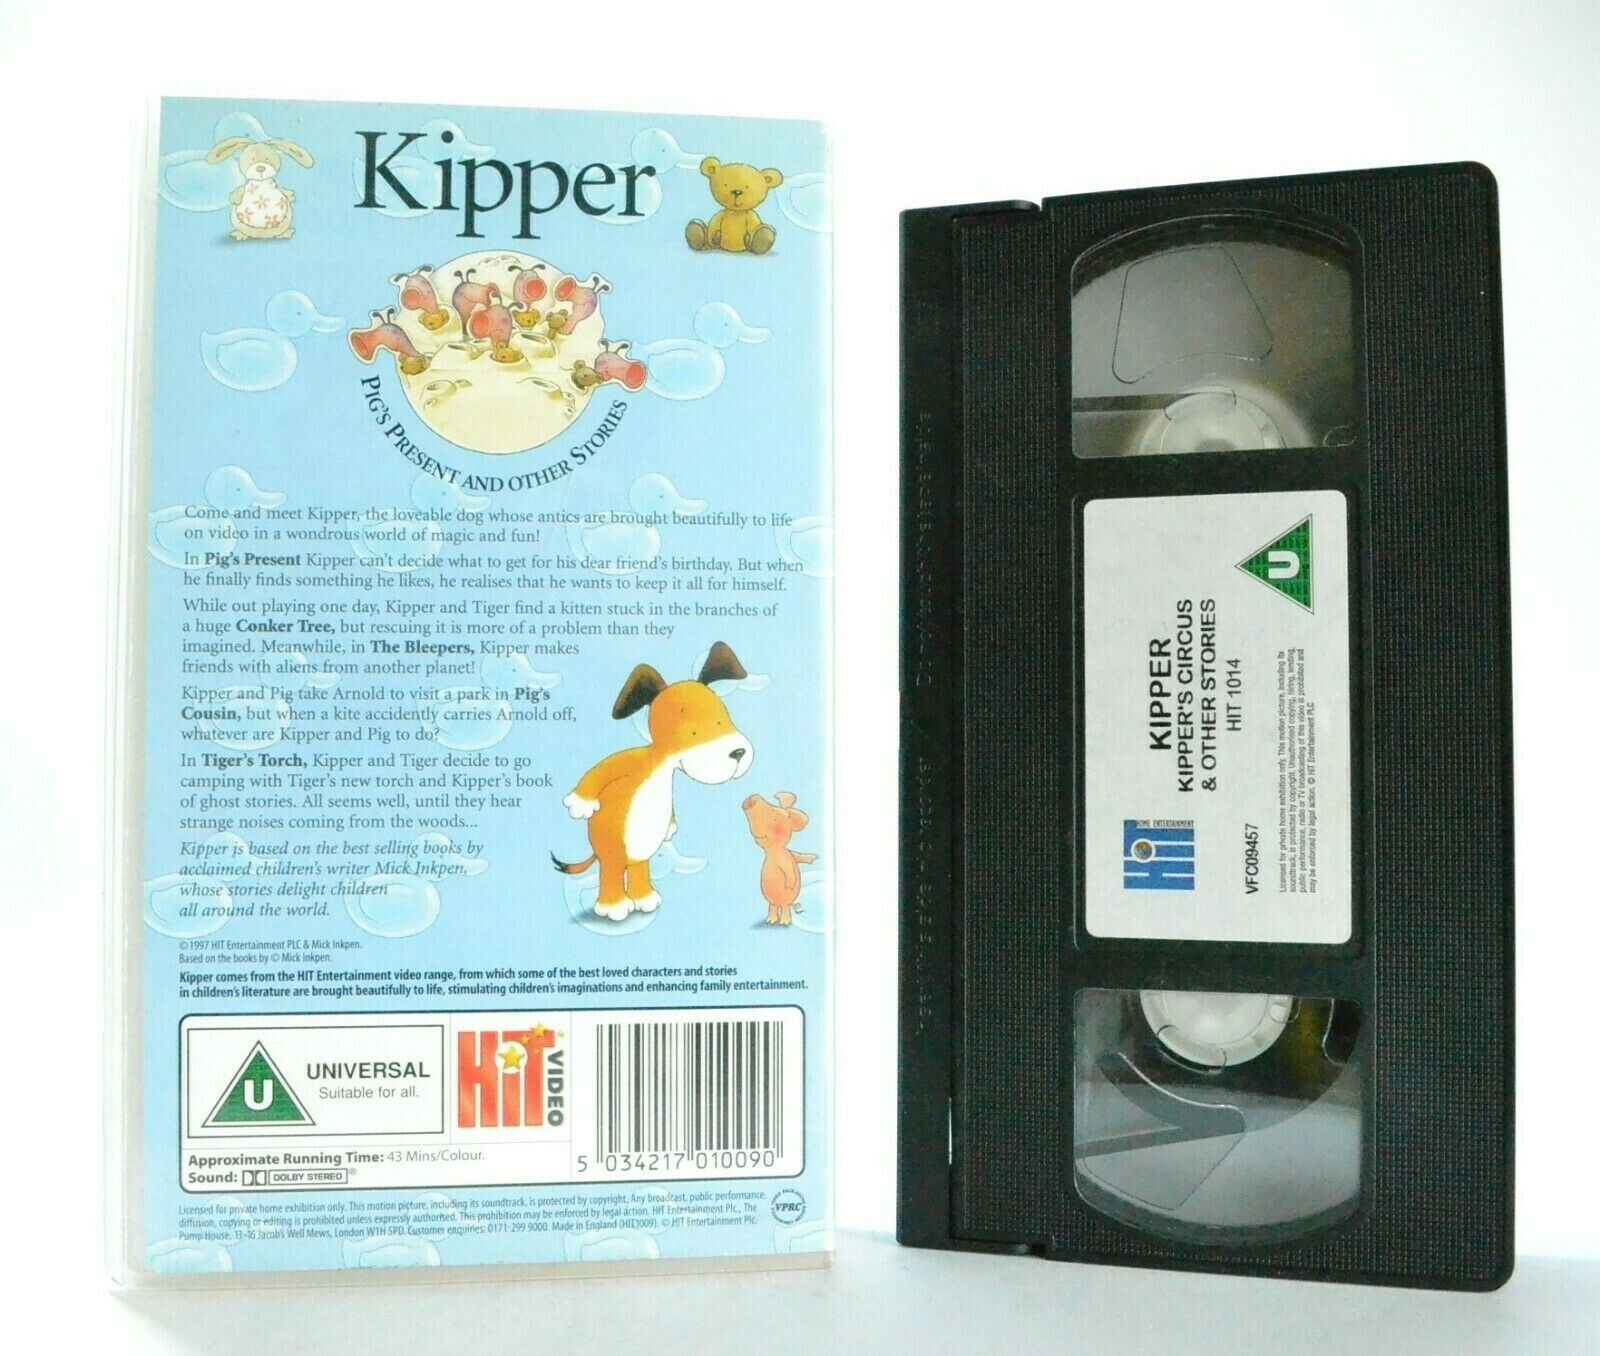 Kipper: Pig's Present And Other Stories - Animated - Educational - Kids - VHS-